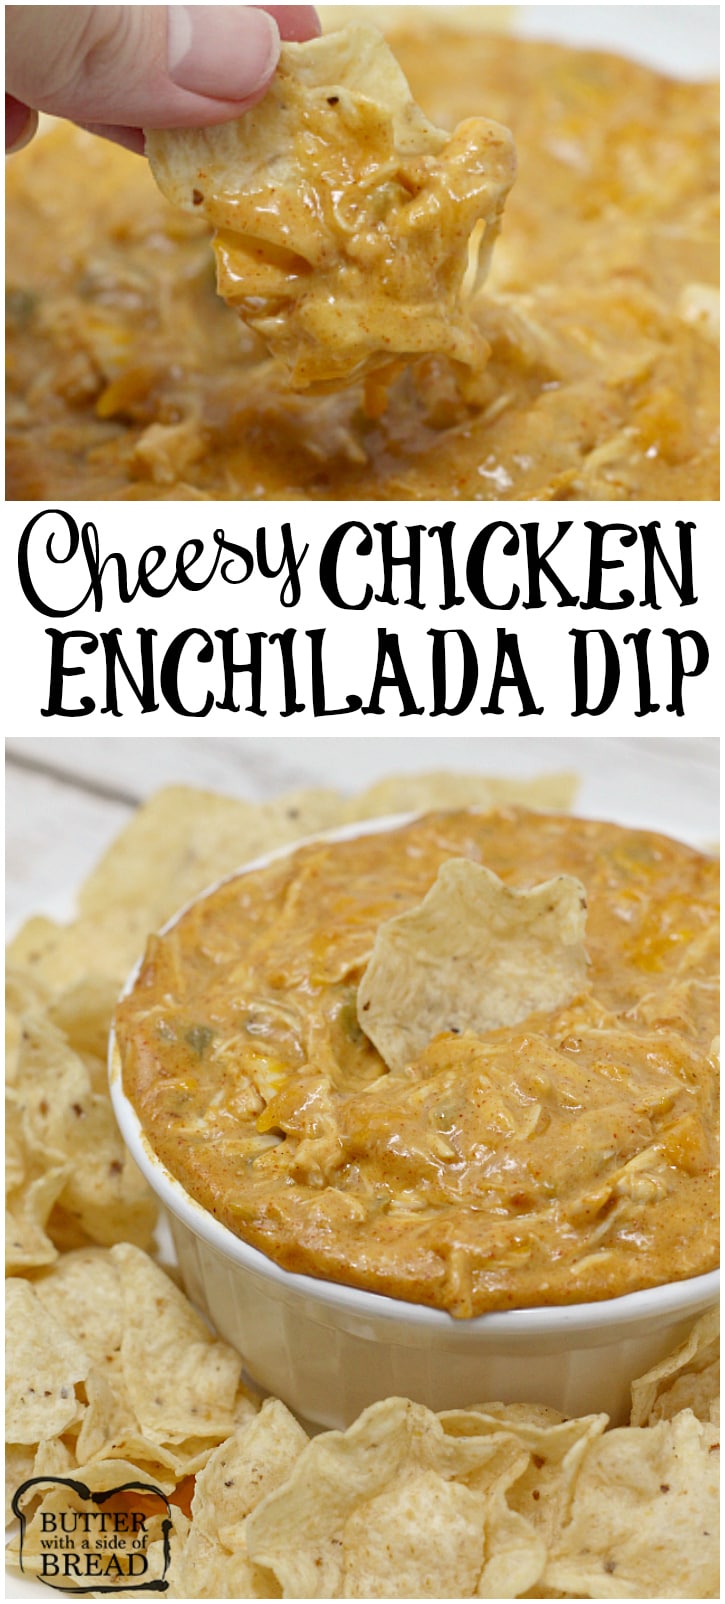 Cheesy Chicken Enchilada Dip is loaded with cheese, chicken, and a little bit of spice too! Add some chips and this is the perfect party food! 